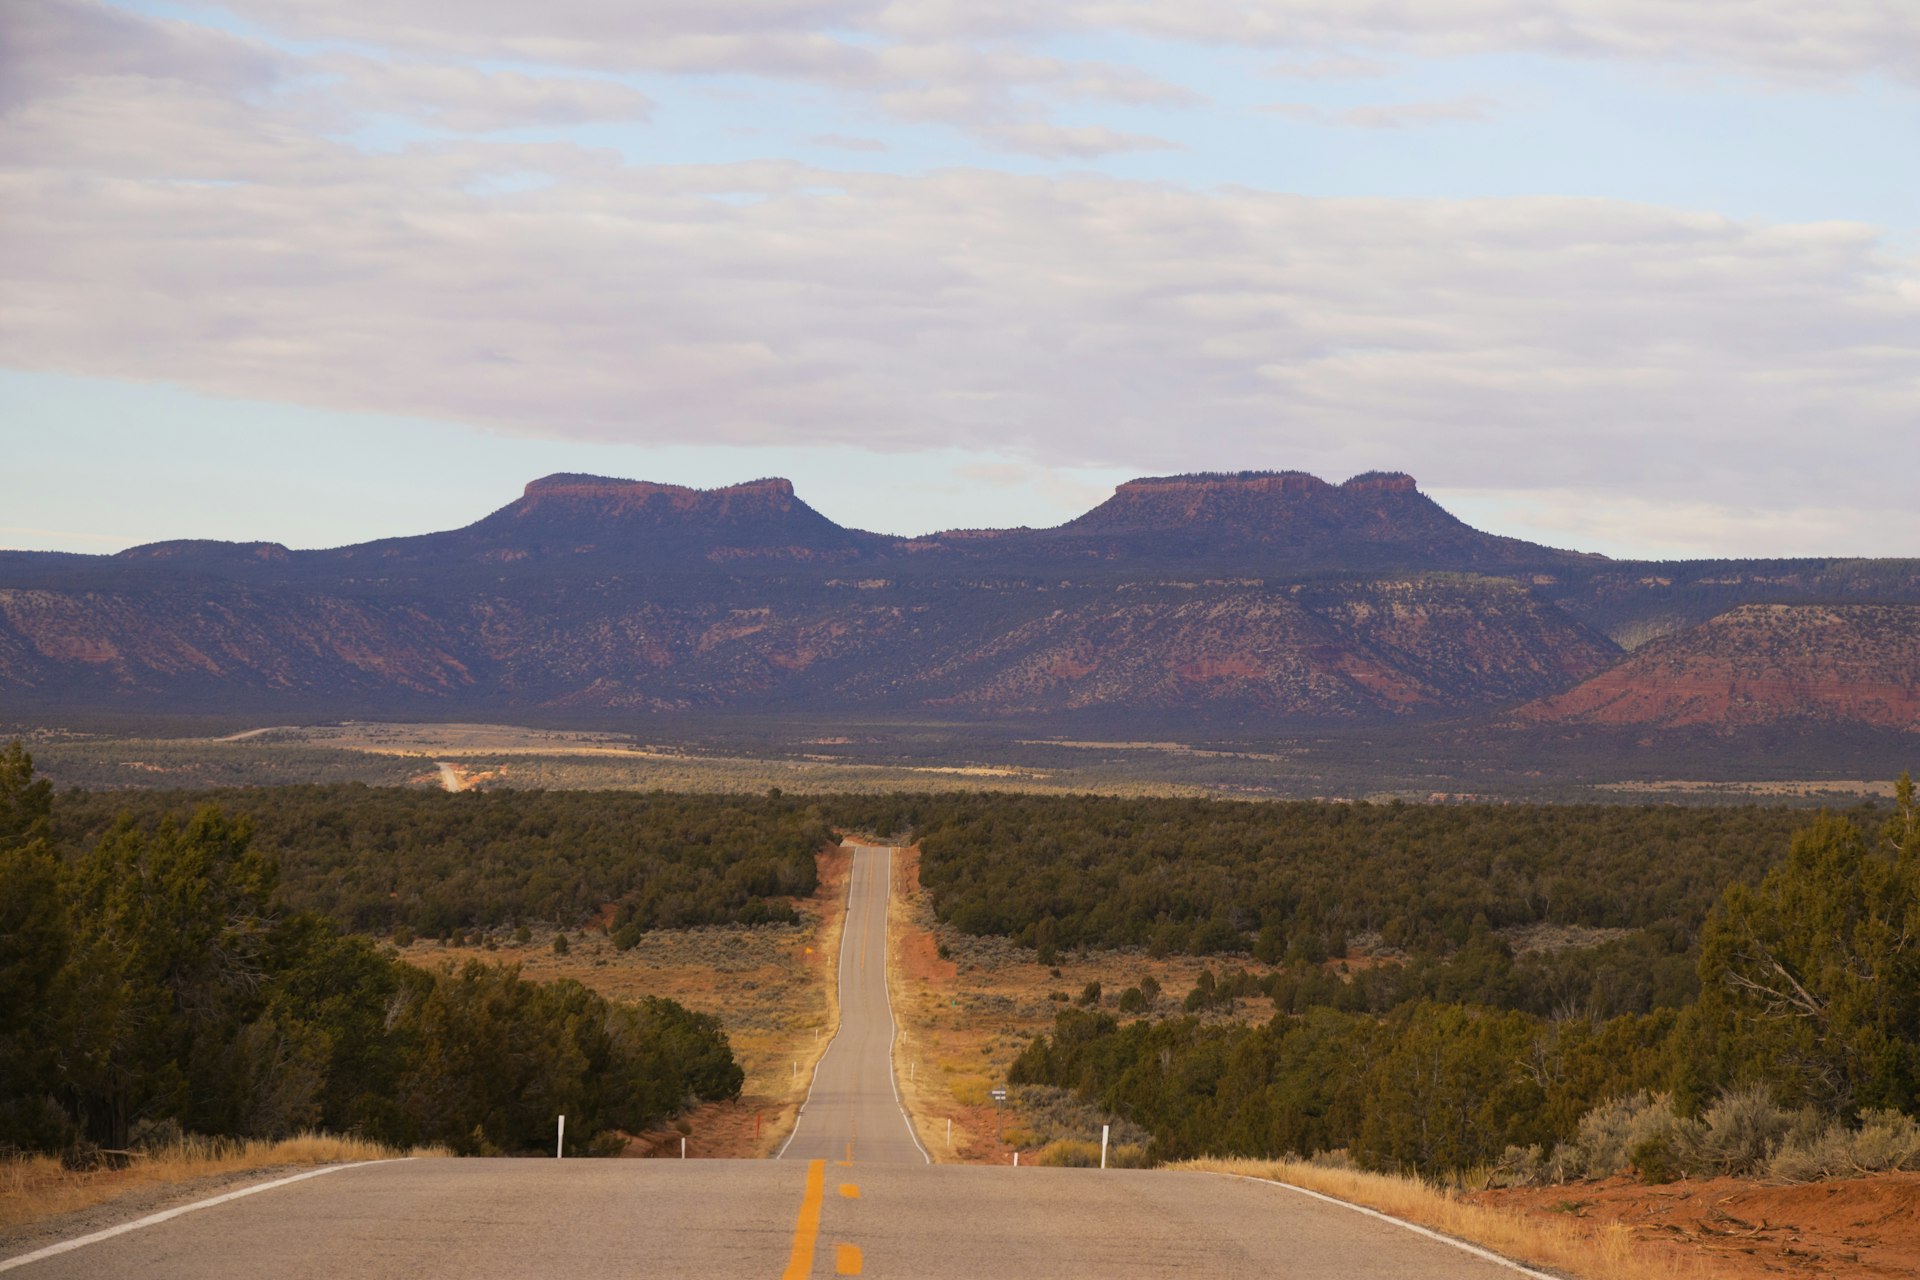 A long. straight highway runs between the twin buttes known as Bears Ears which gave its name to the National Monument